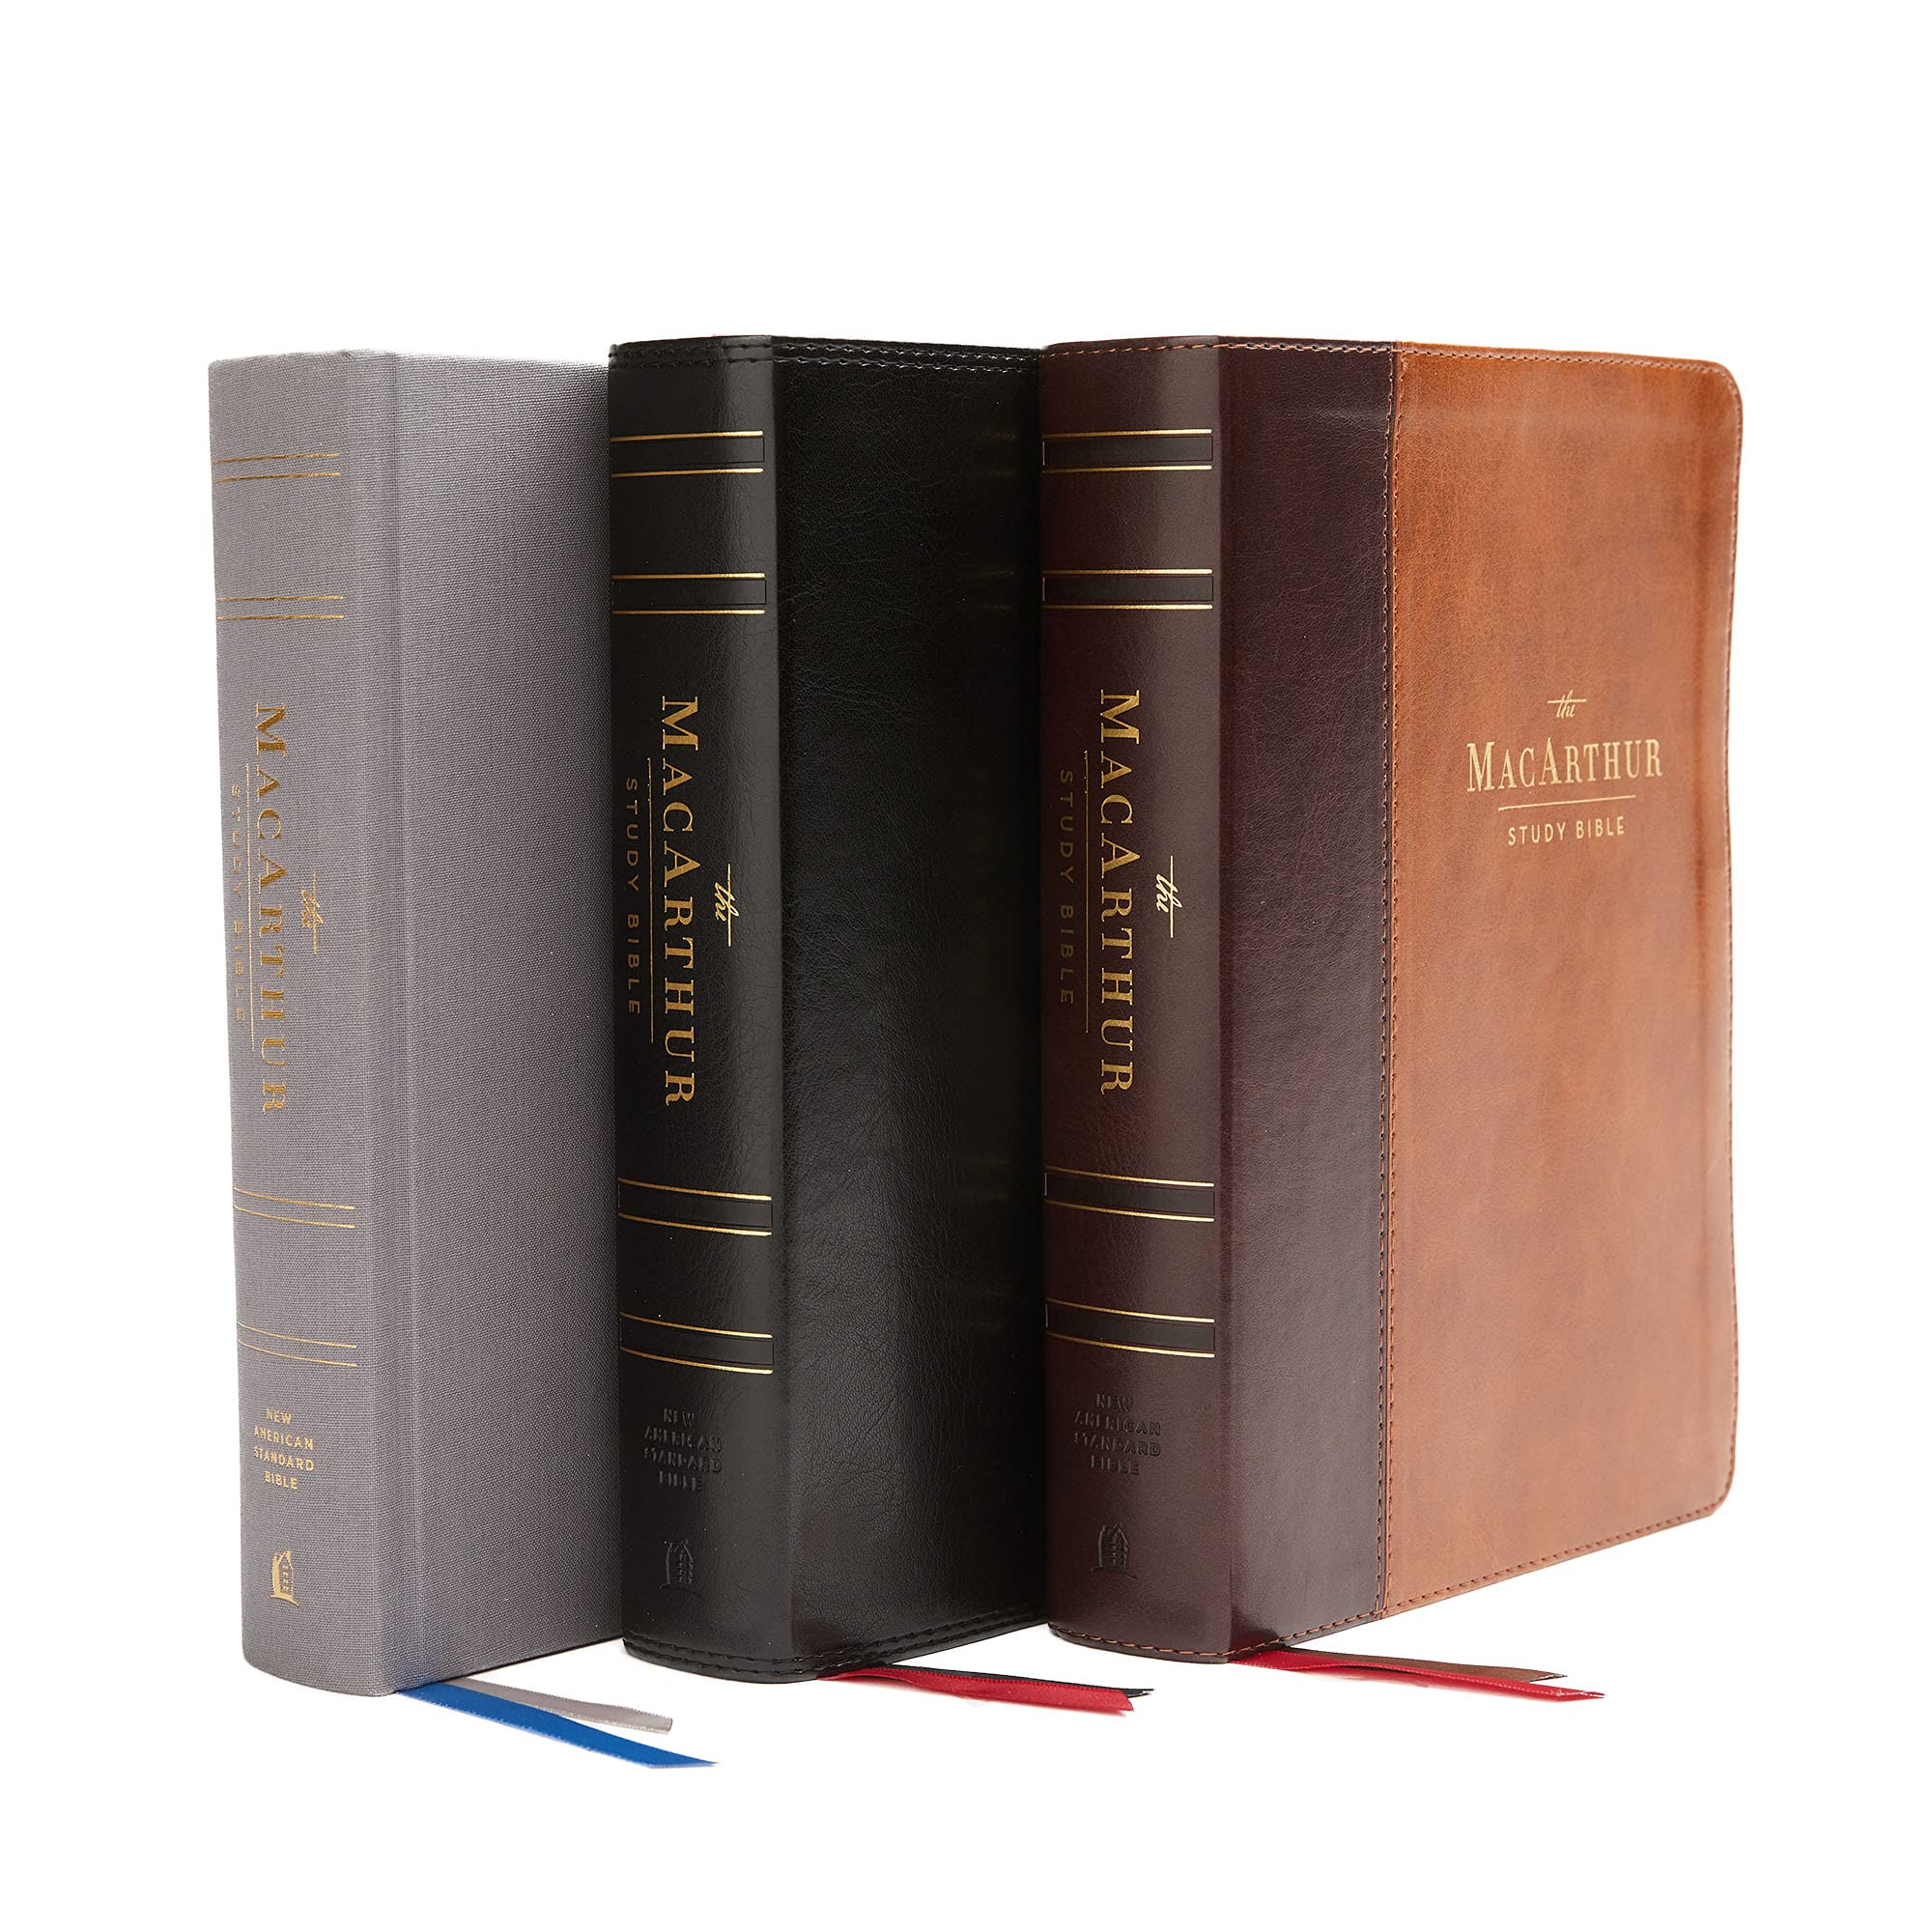 NASB, MacArthur Study Bible, 2nd Edition, Leathersoft, Brown, Comfort Print: Unleashing God's Truth One Verse at a Time